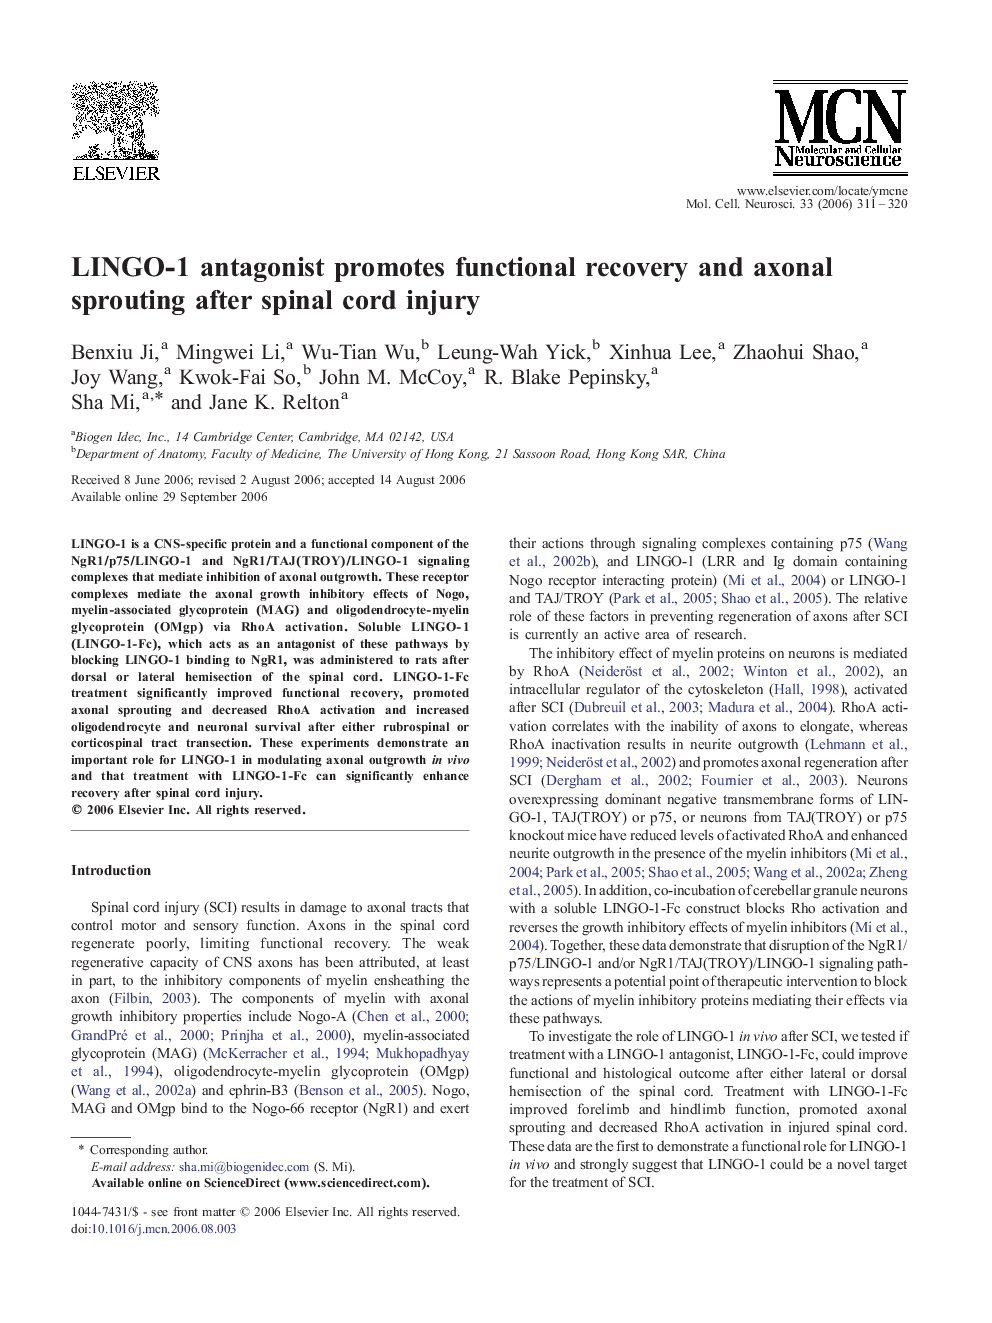 LINGO-1 antagonist promotes functional recovery and axonal sprouting after spinal cord injury